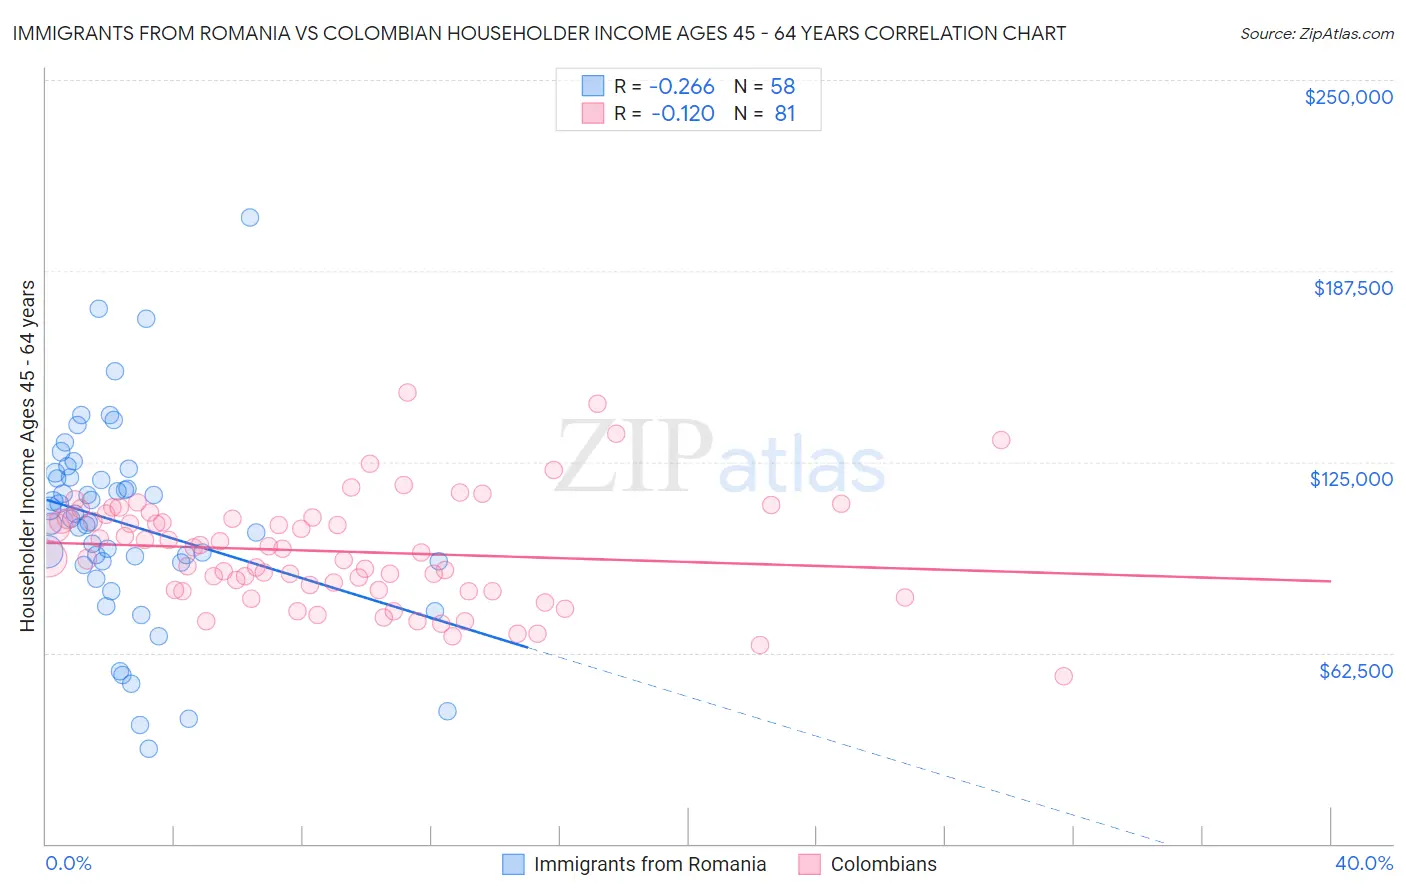 Immigrants from Romania vs Colombian Householder Income Ages 45 - 64 years